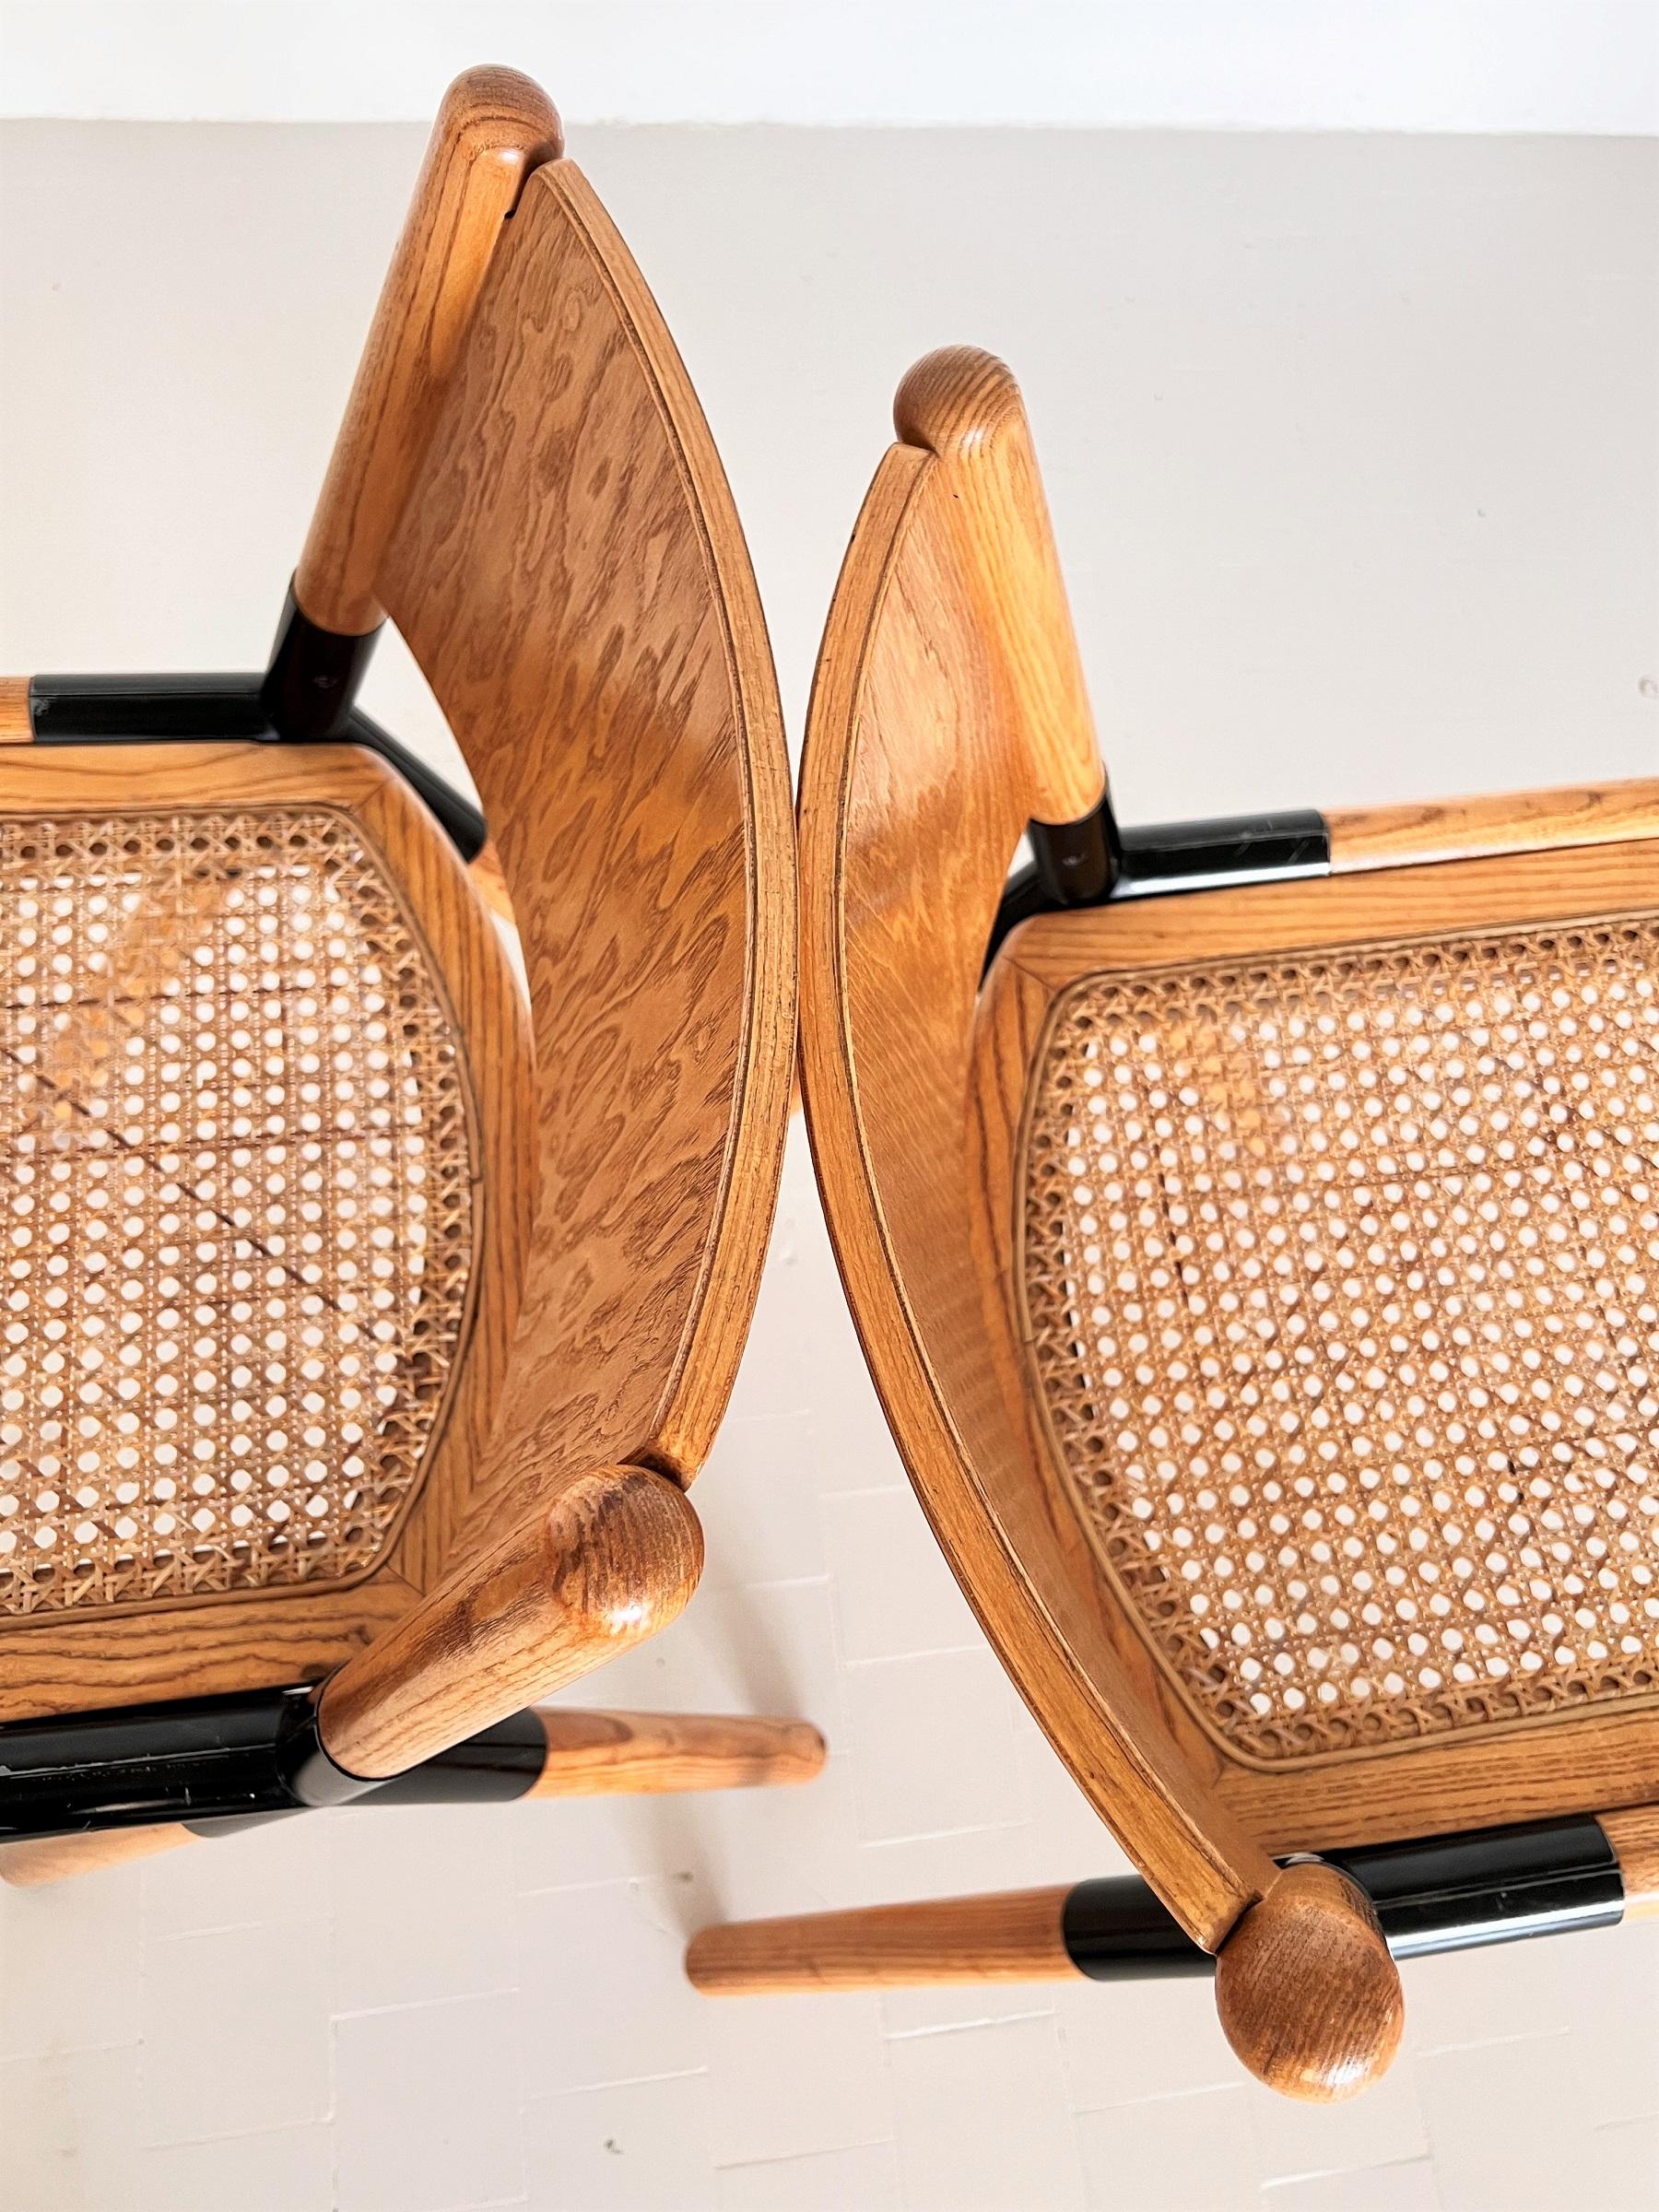 Italian Midcentury Chairs in Oak and Rattan by Mauro Pasquinelli, 1975 For Sale 9